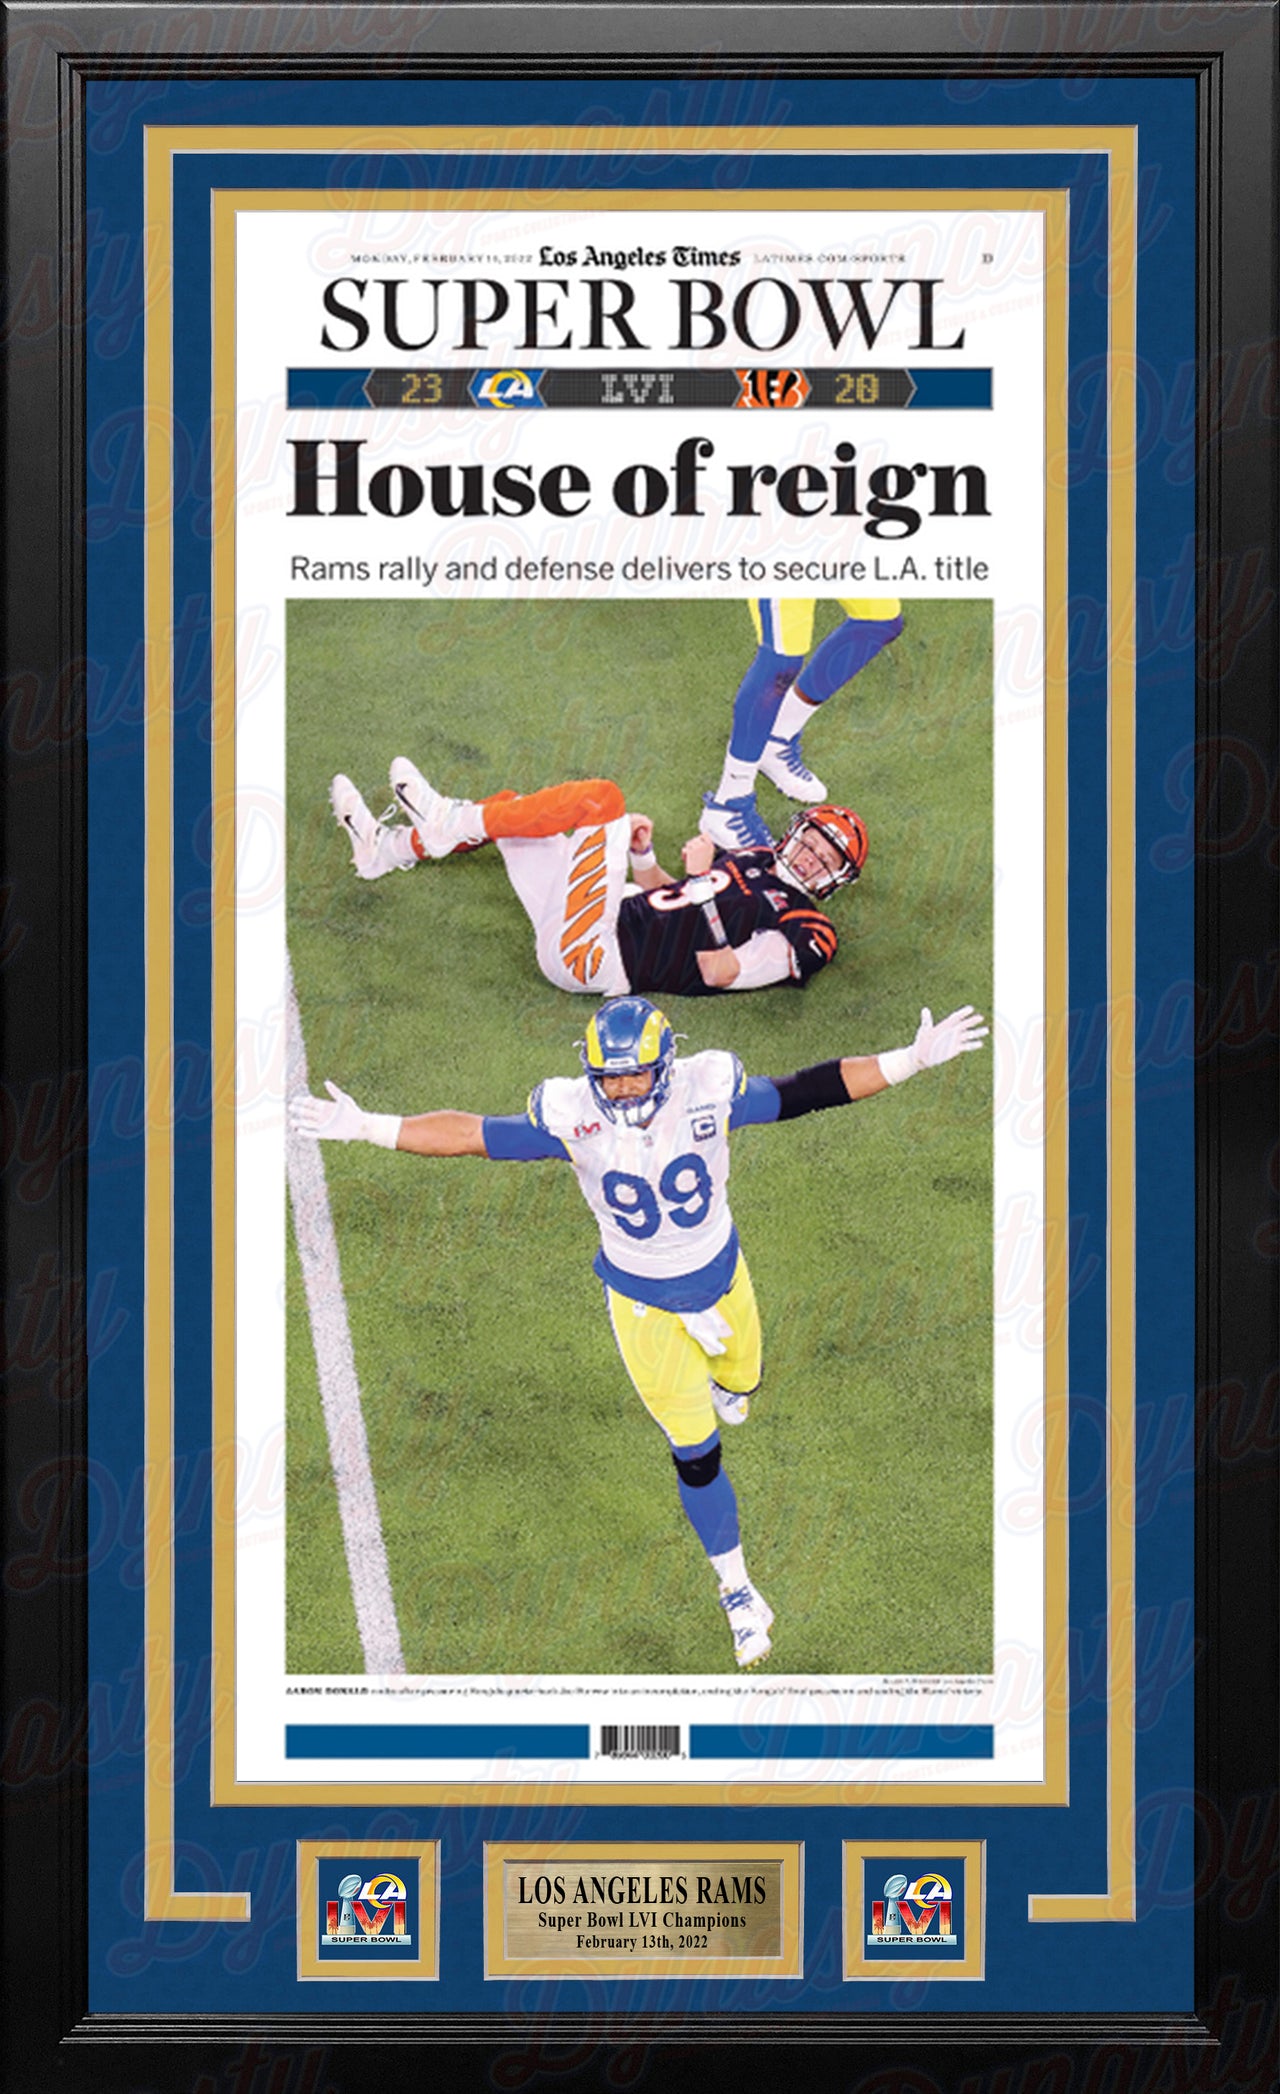 Los Angeles Times Rams Super Bowl LVI Champions Framed House of Reign Newspaper - Dynasty Sports & Framing 